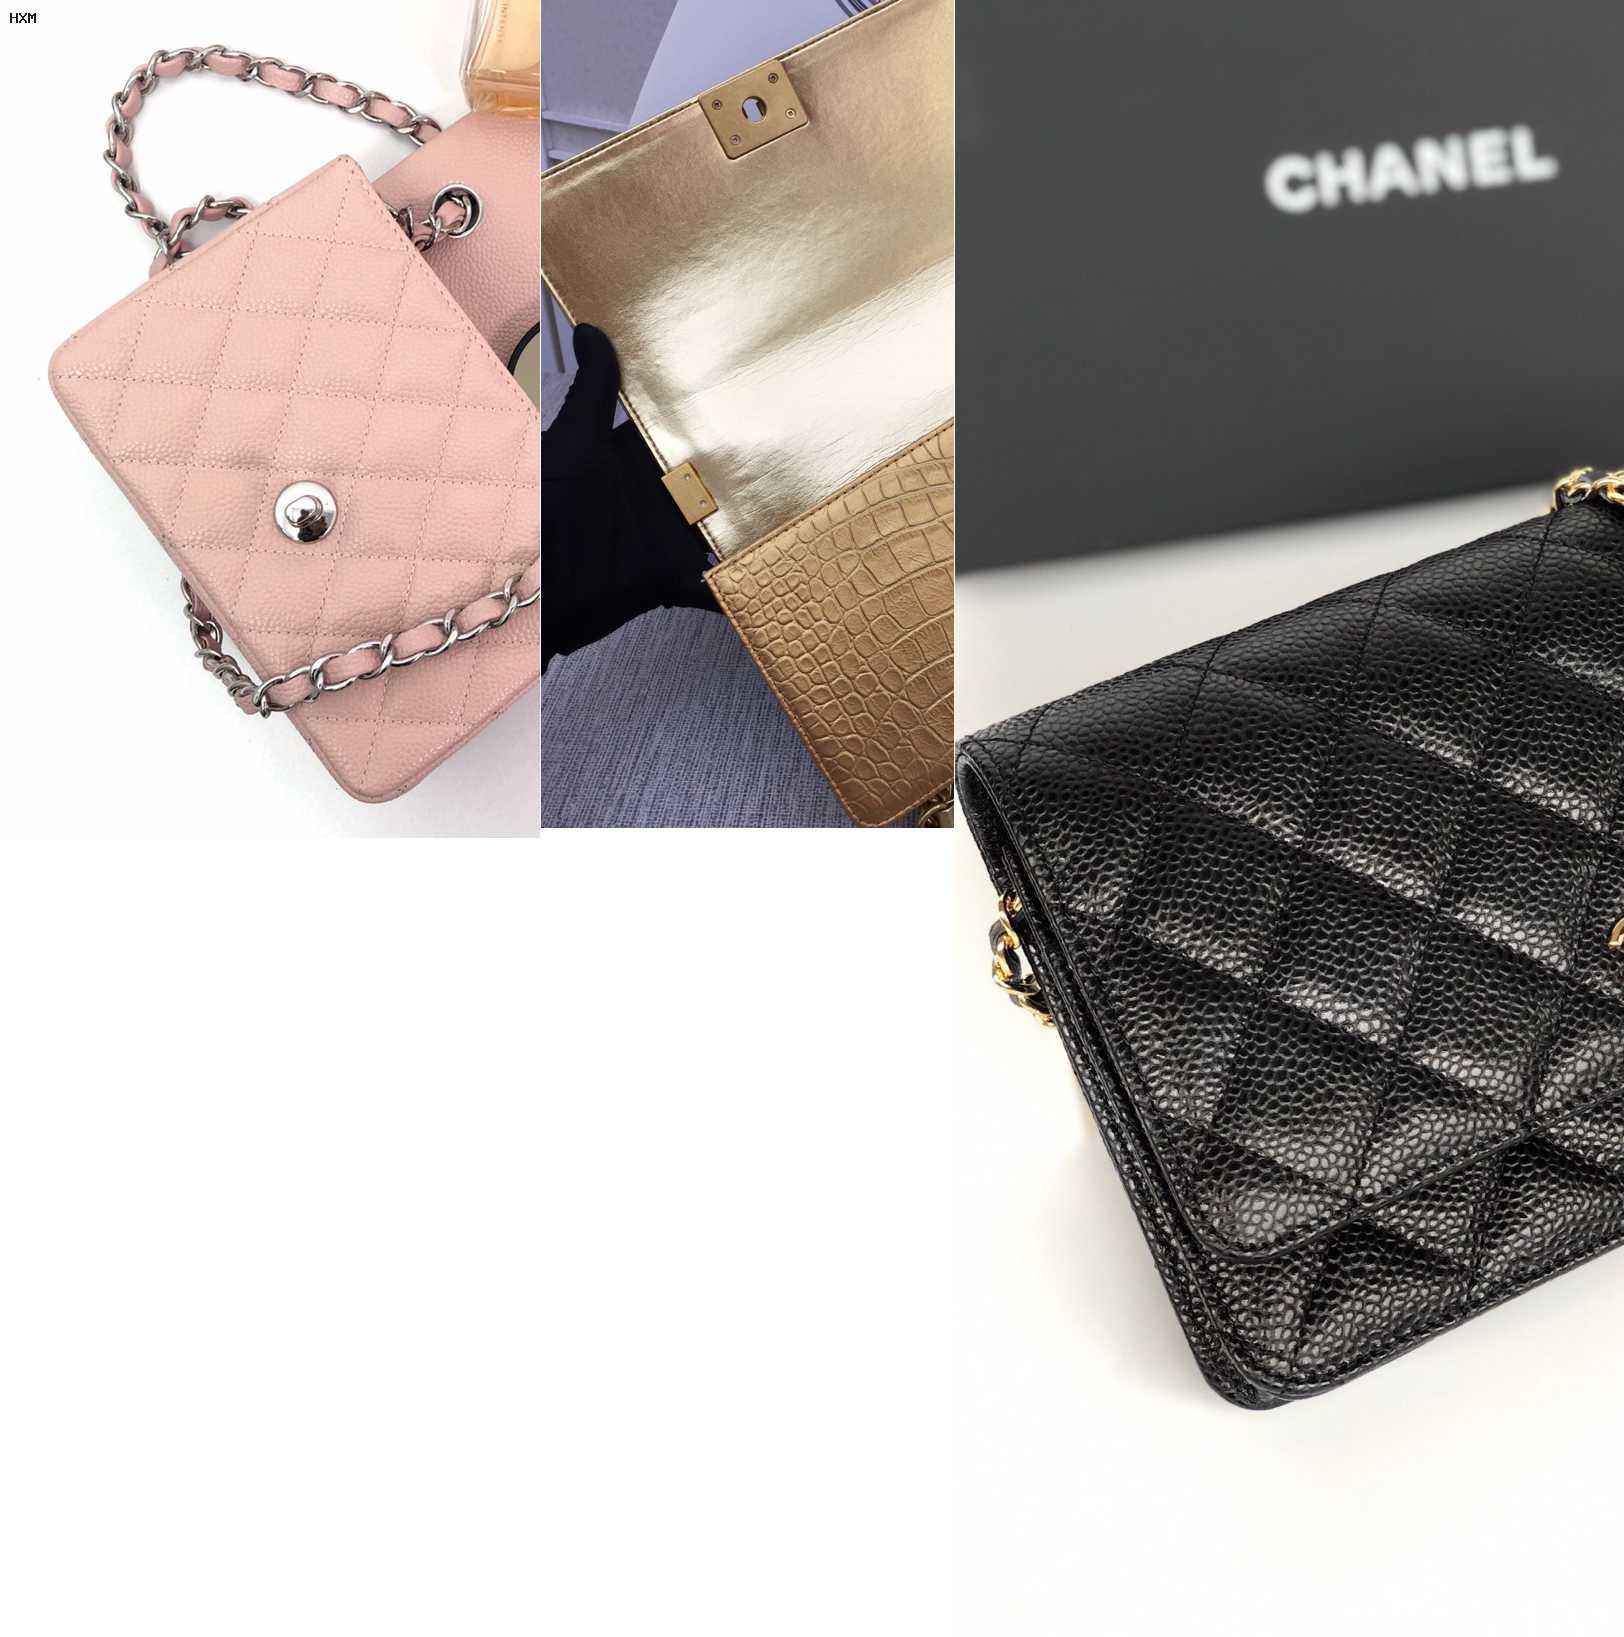 deauville chanel sac